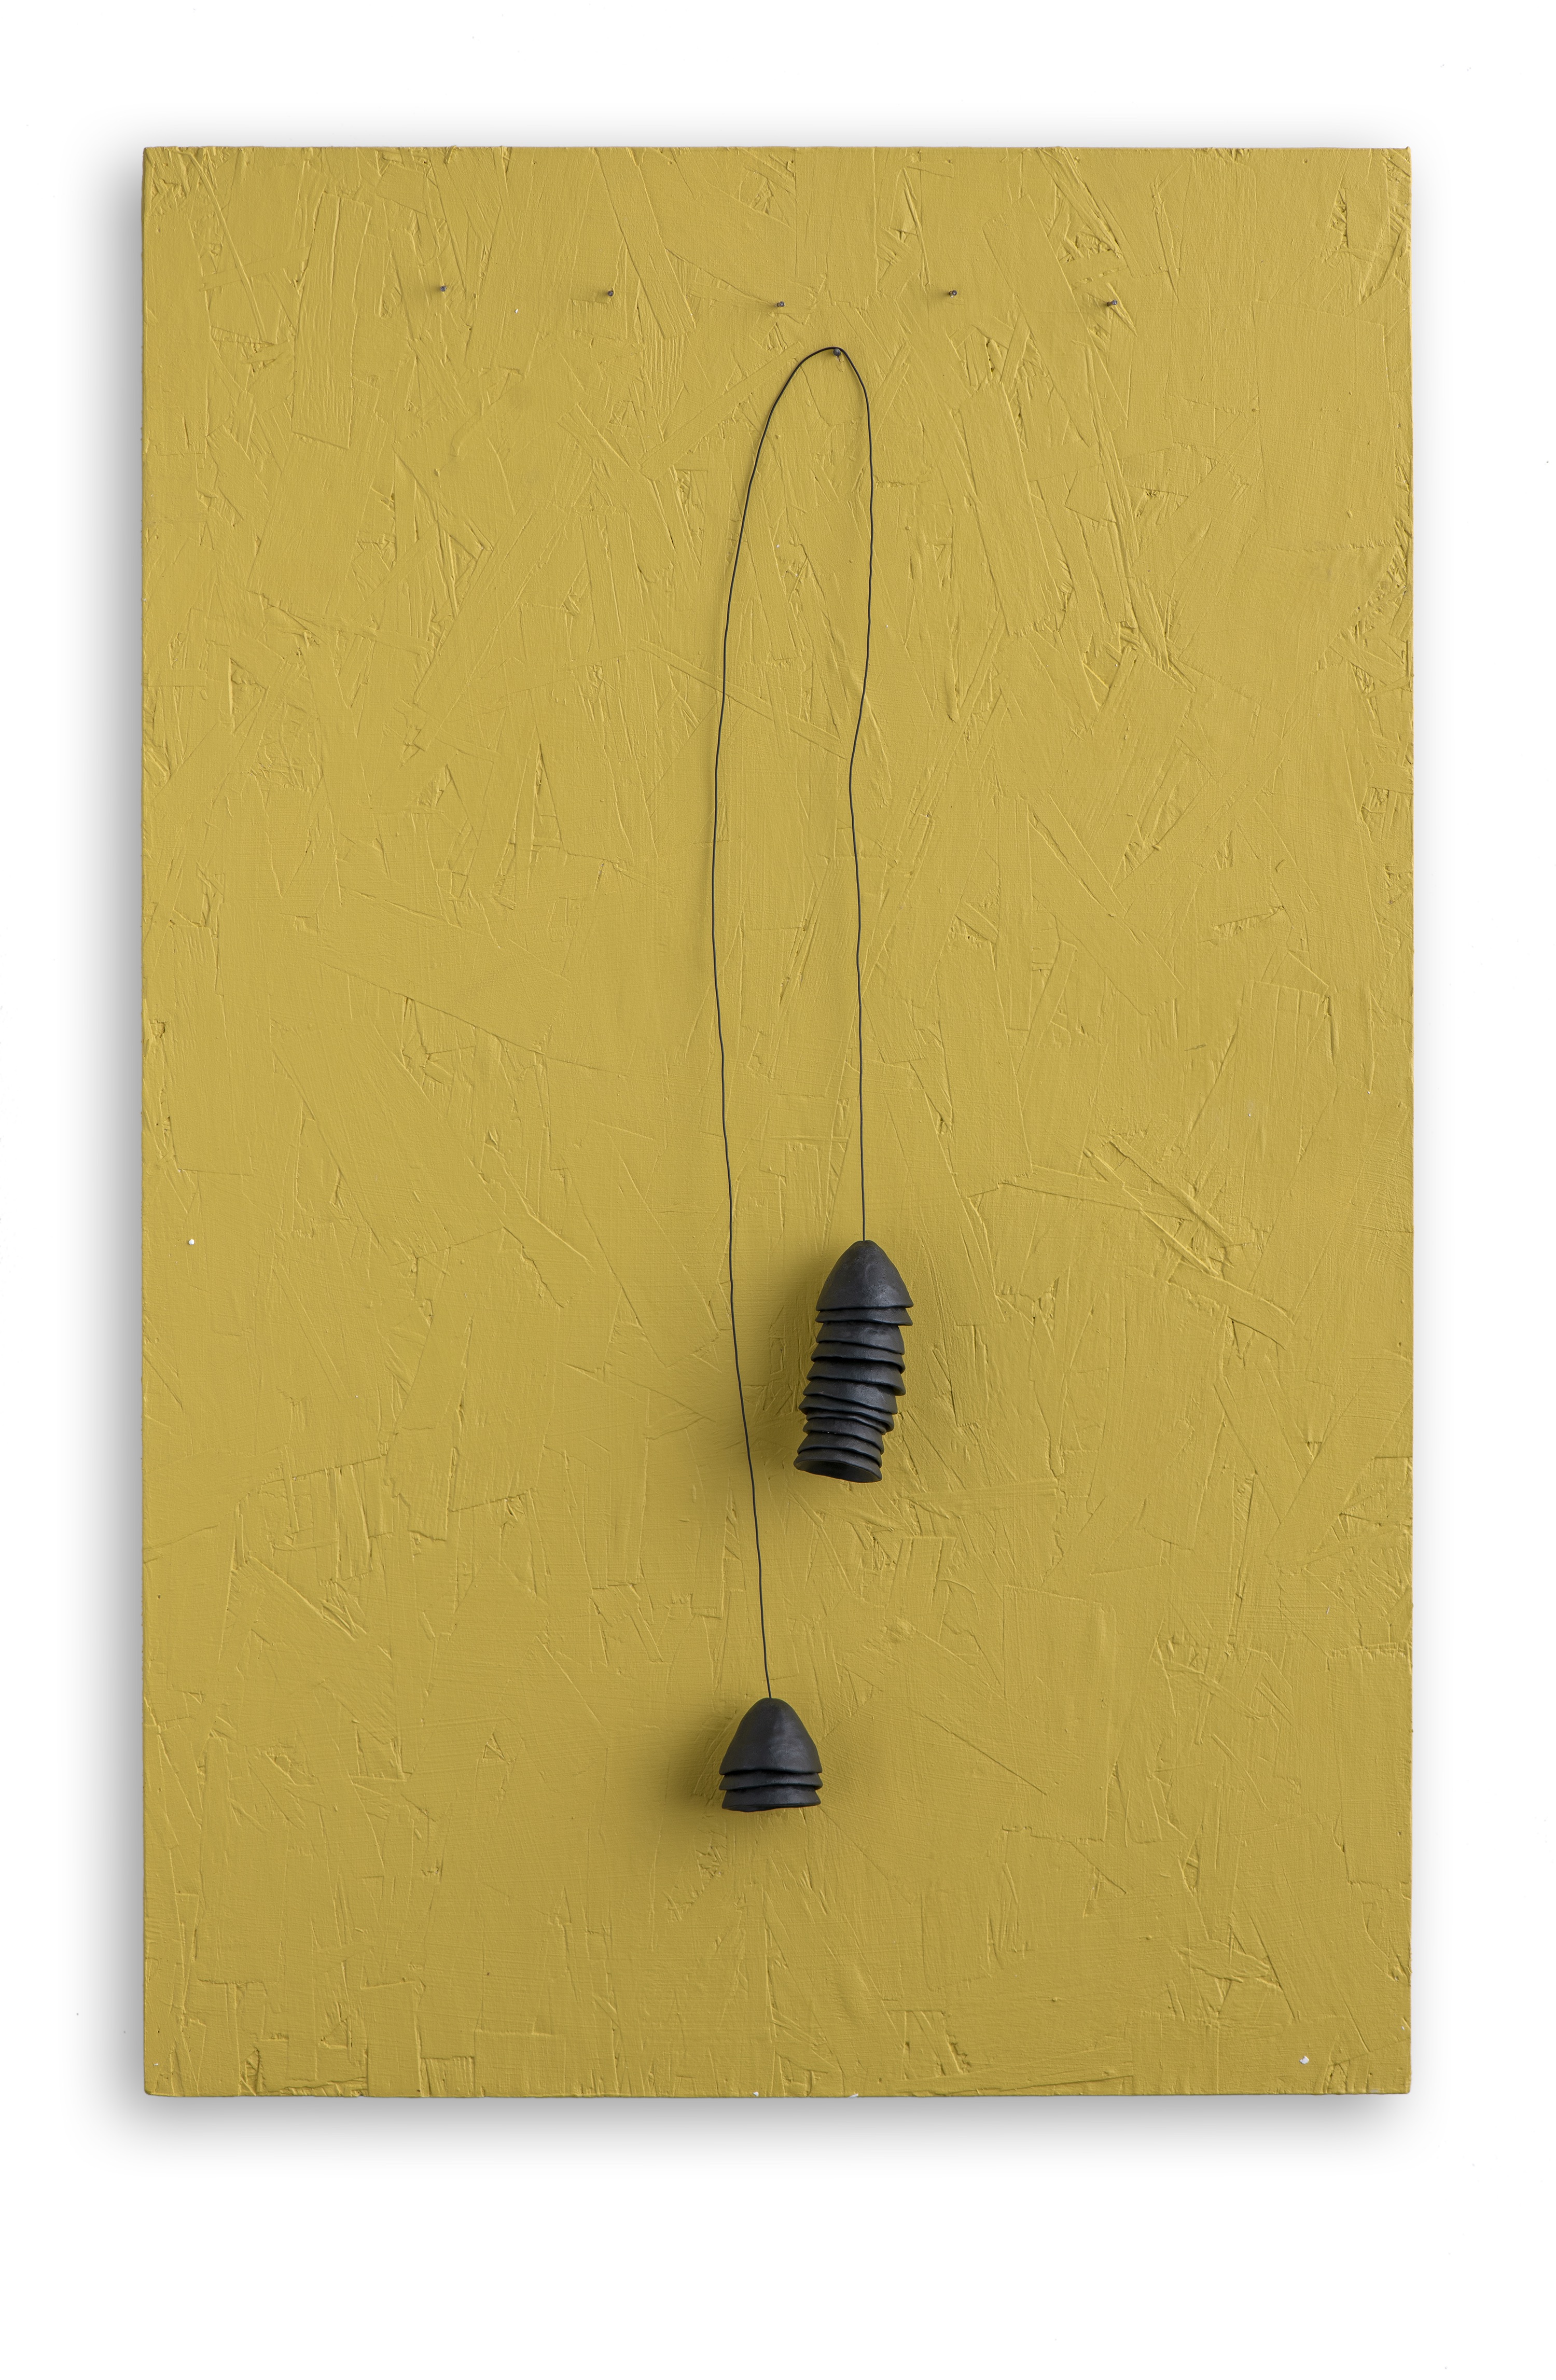 A black wire hanging on a yellow wall